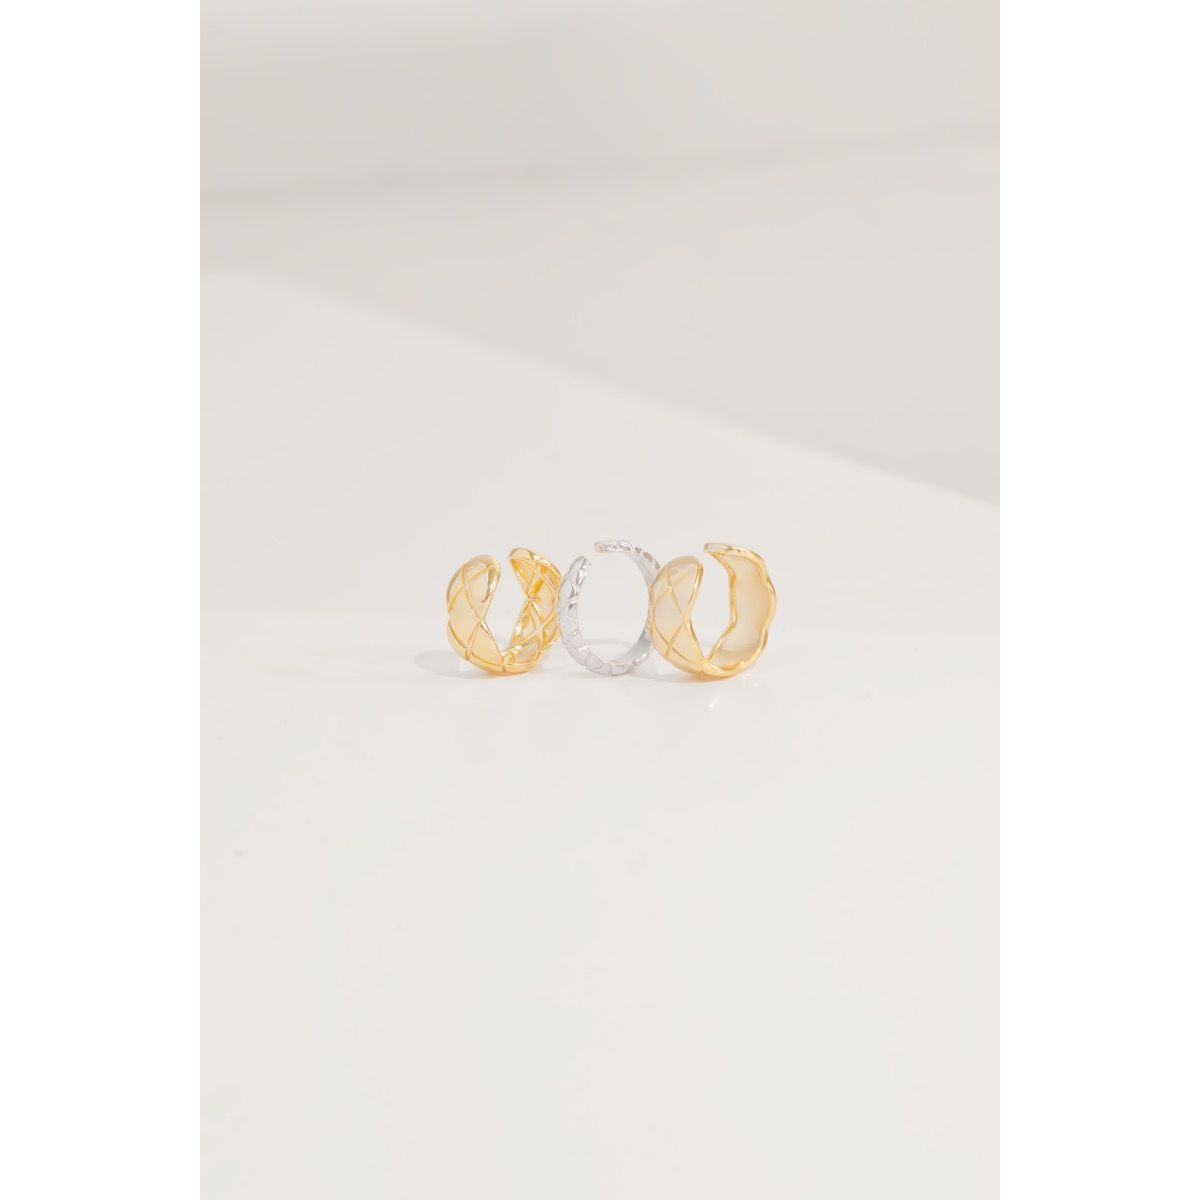 Adjustable Deep Ring in Gold